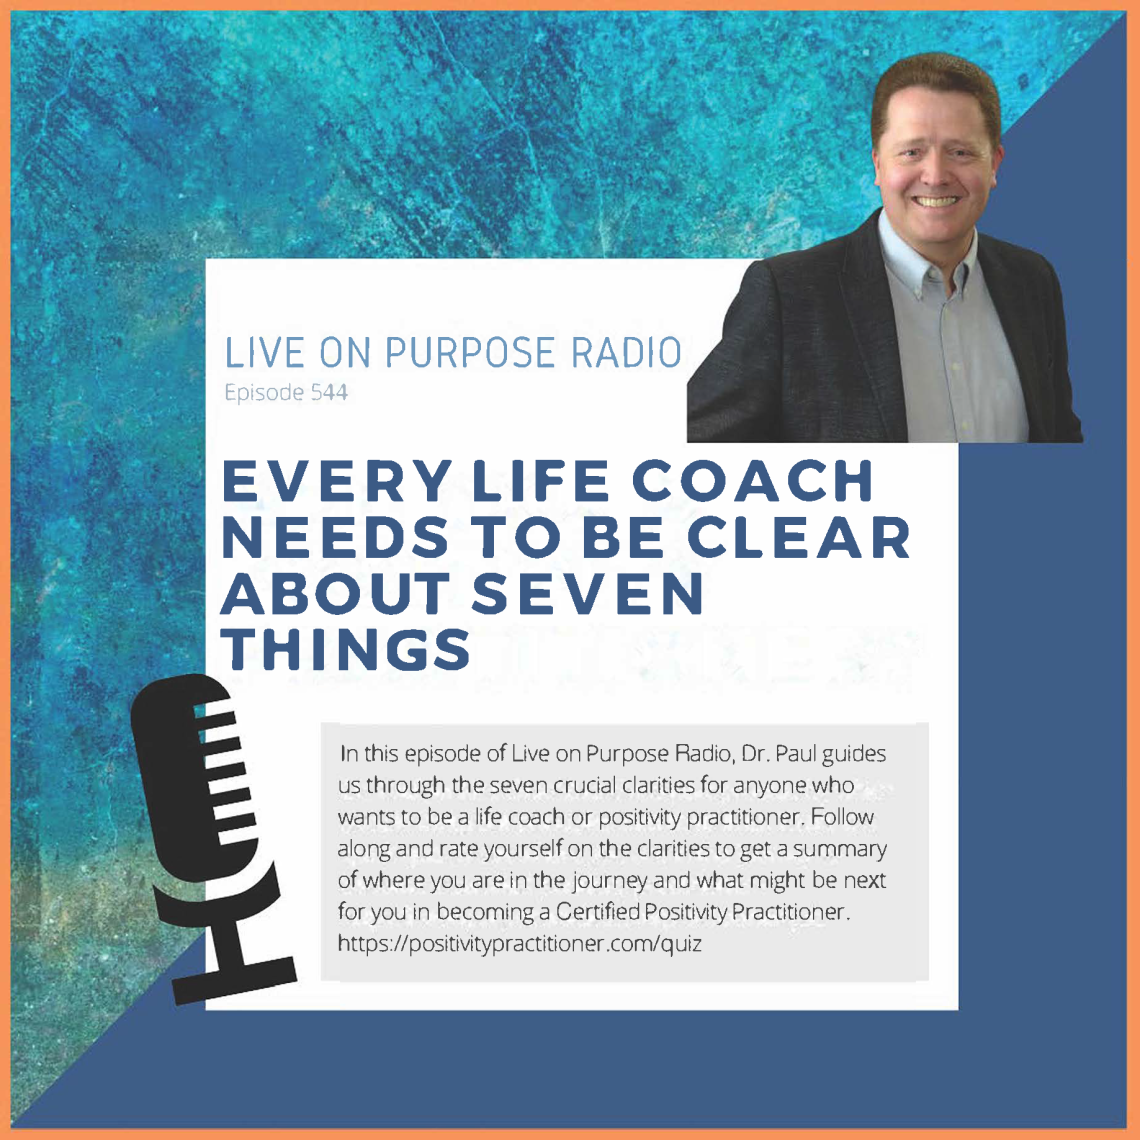 LIVE ON PURPOSE RADIO Episode 544 EVERY LIFE COACH NEEDS TO BE CLEAR ABOUT SEVEN THINGS In this episode of Live on Purpose Radio, Dr. Paul guides us through the seven crucial clarities for anyone who wants to be a life coach or positivity practitioner. Follow along and rate yourself on the clarities to get a summary of where you are in the journey and what might be next for you in becoming a Certified Positivity Practitioner. https://positivitypractitioner.com/quiz